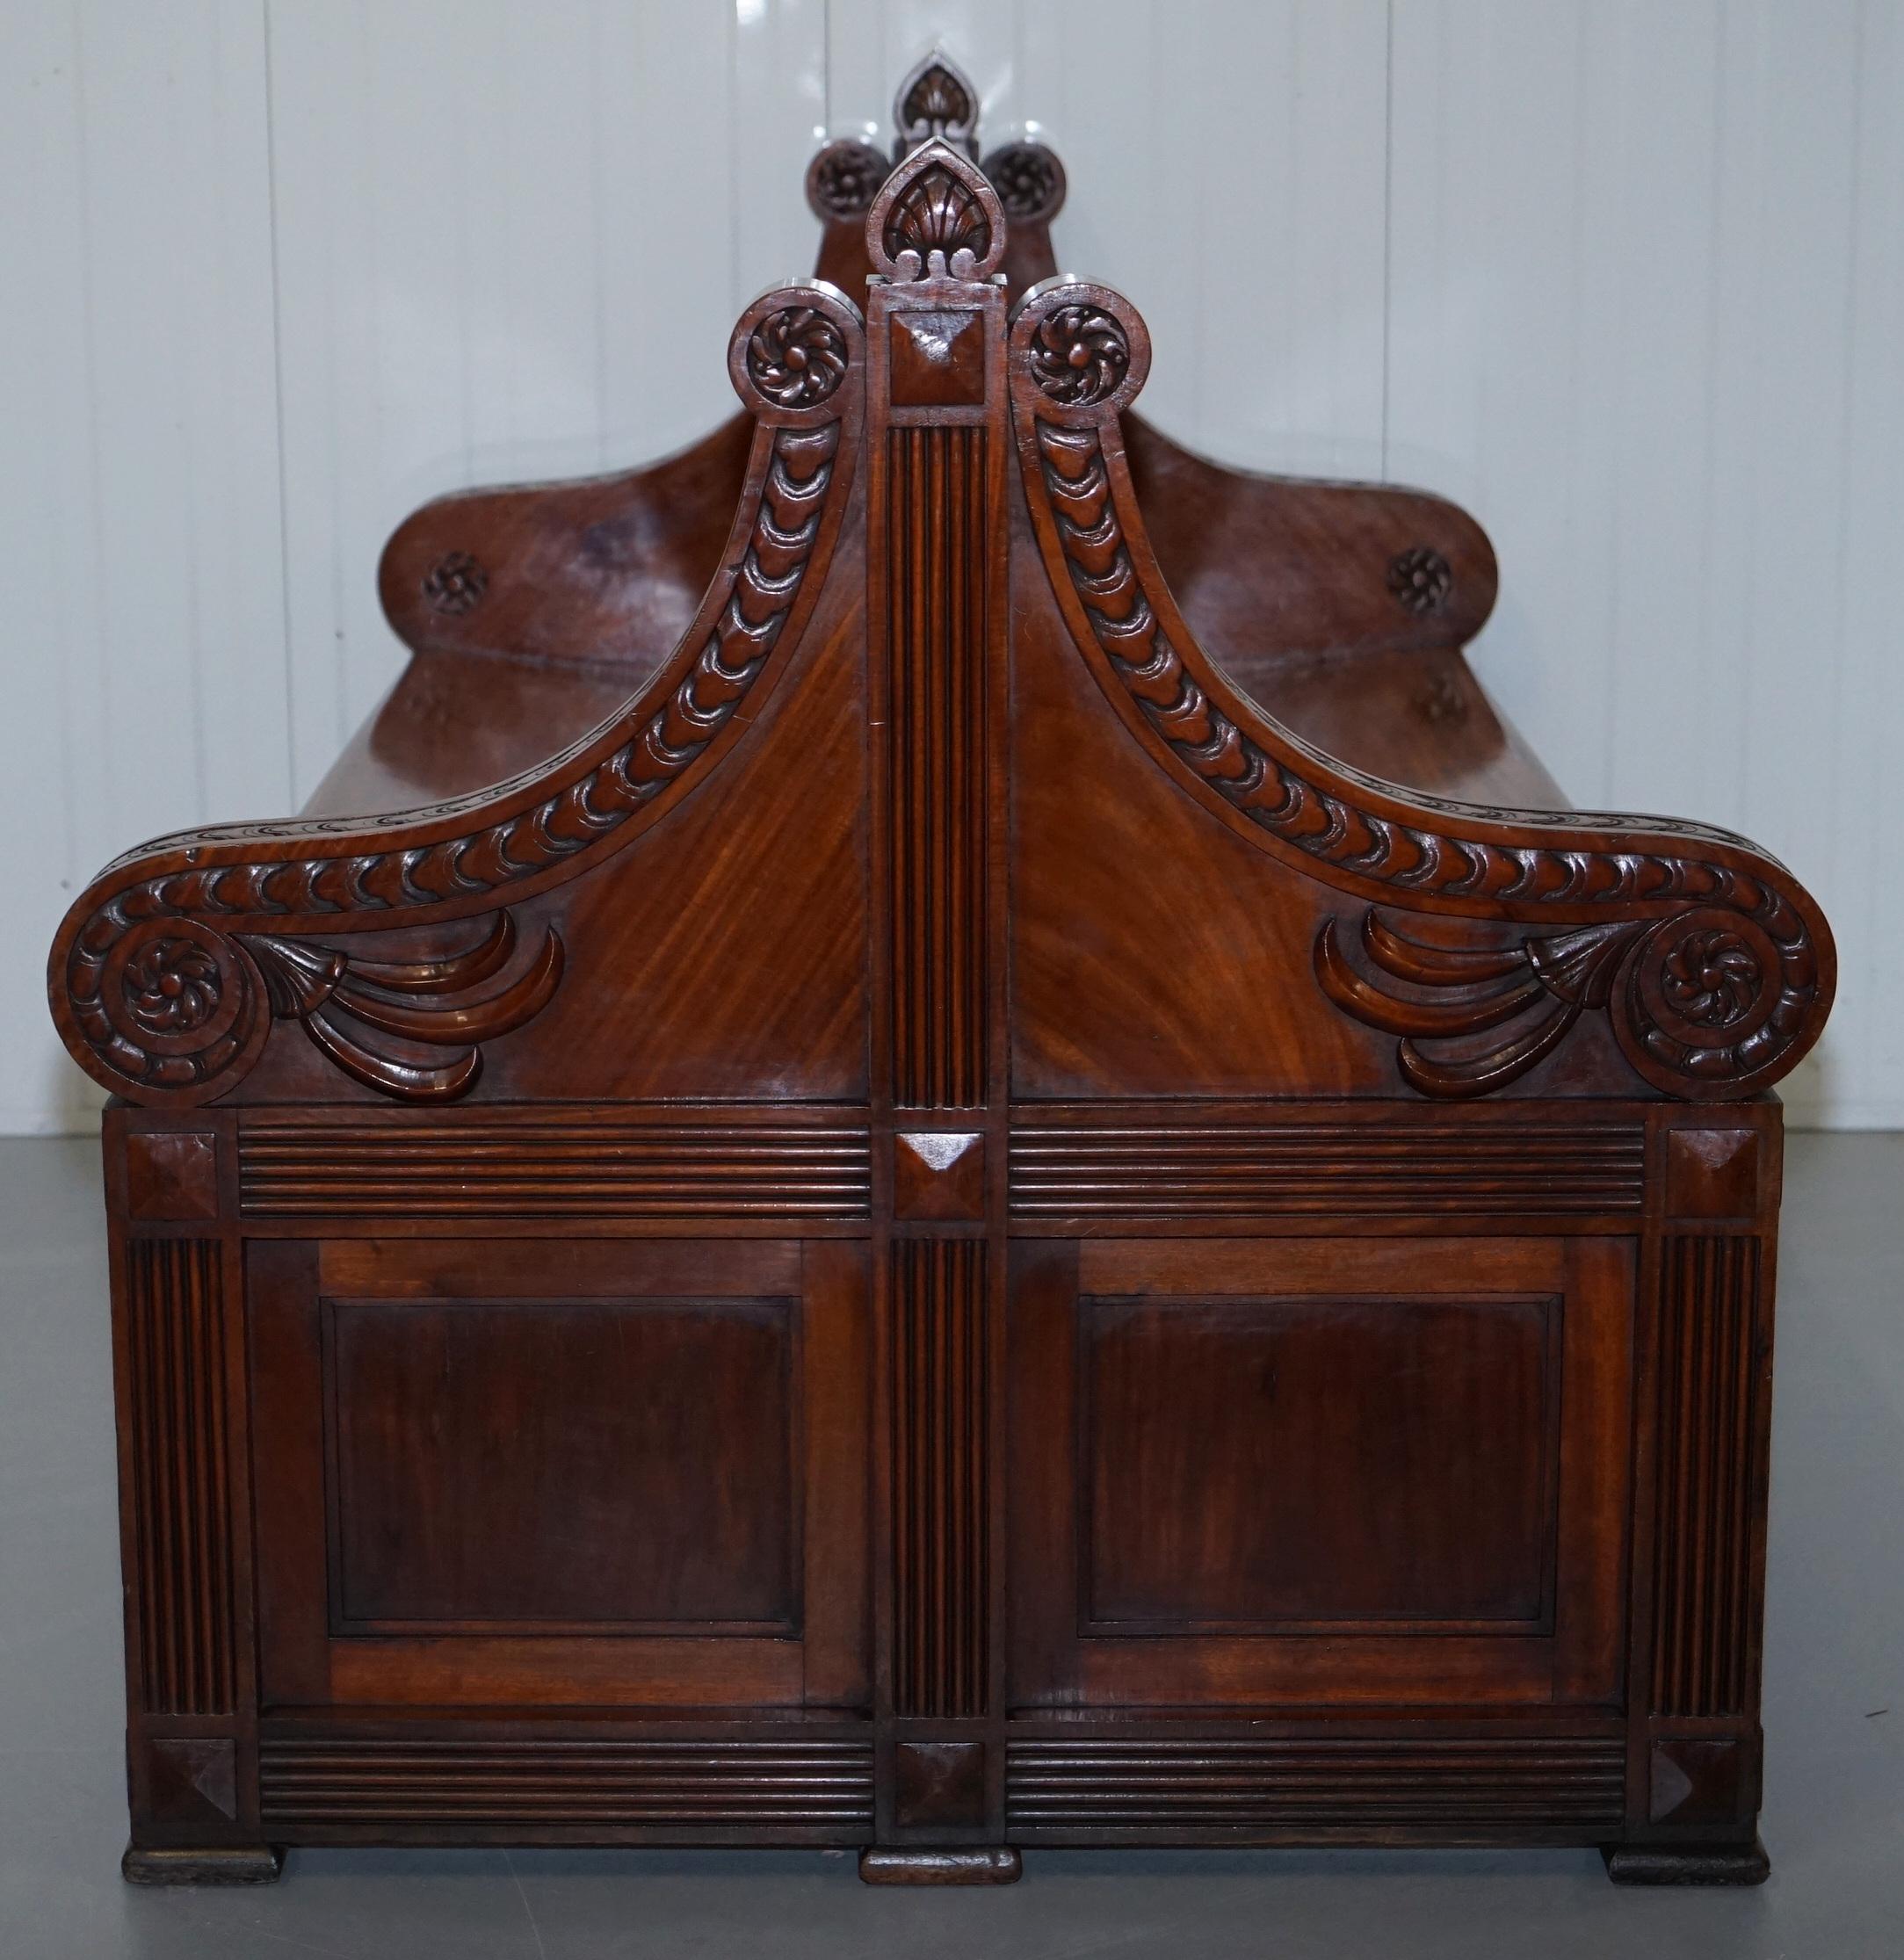 Rare Victorian Walnut Double Sided Museum Gallery Pew Bench Pugin Gothic Steeple For Sale 12